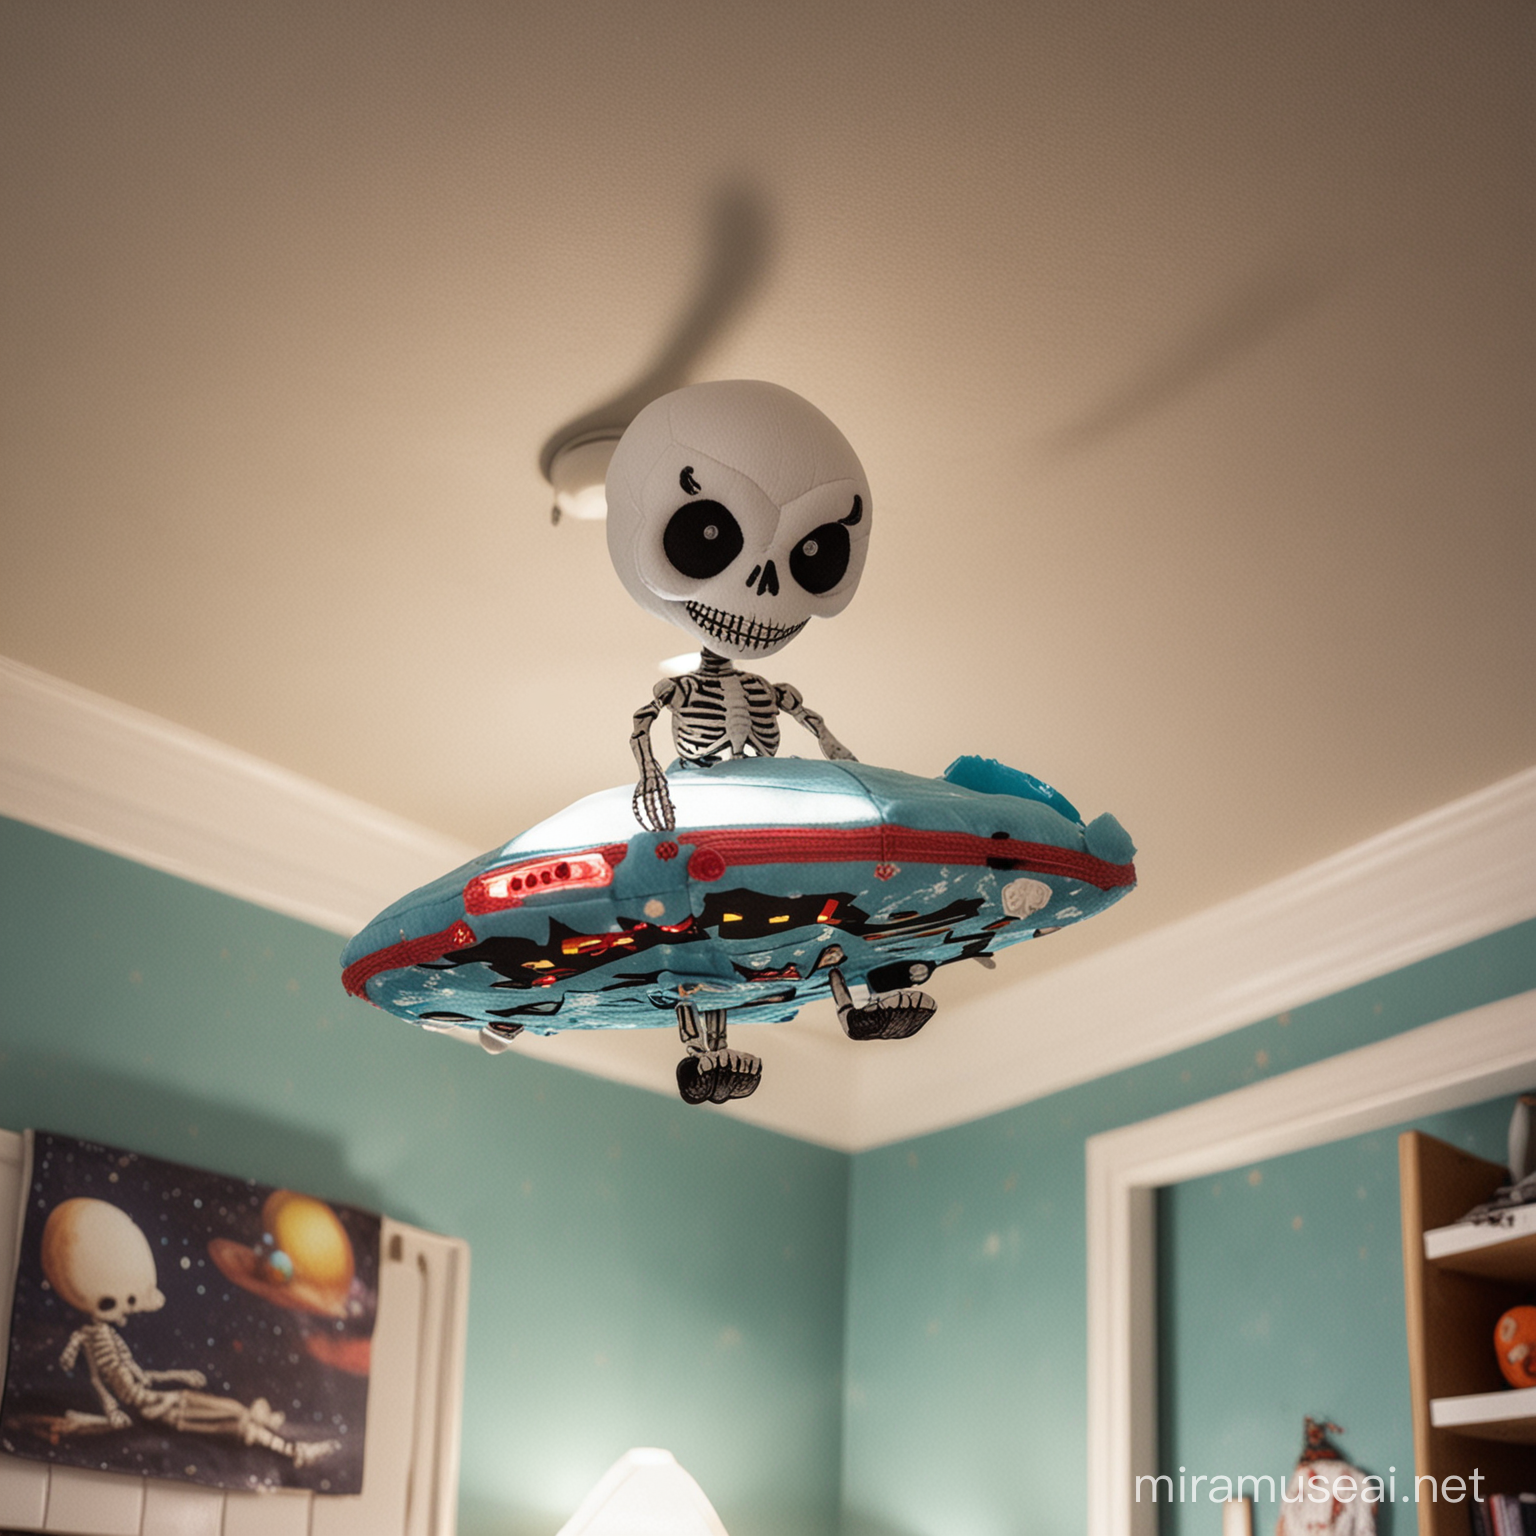 A plush toy of a skeleton flying a ufo in a boys room 